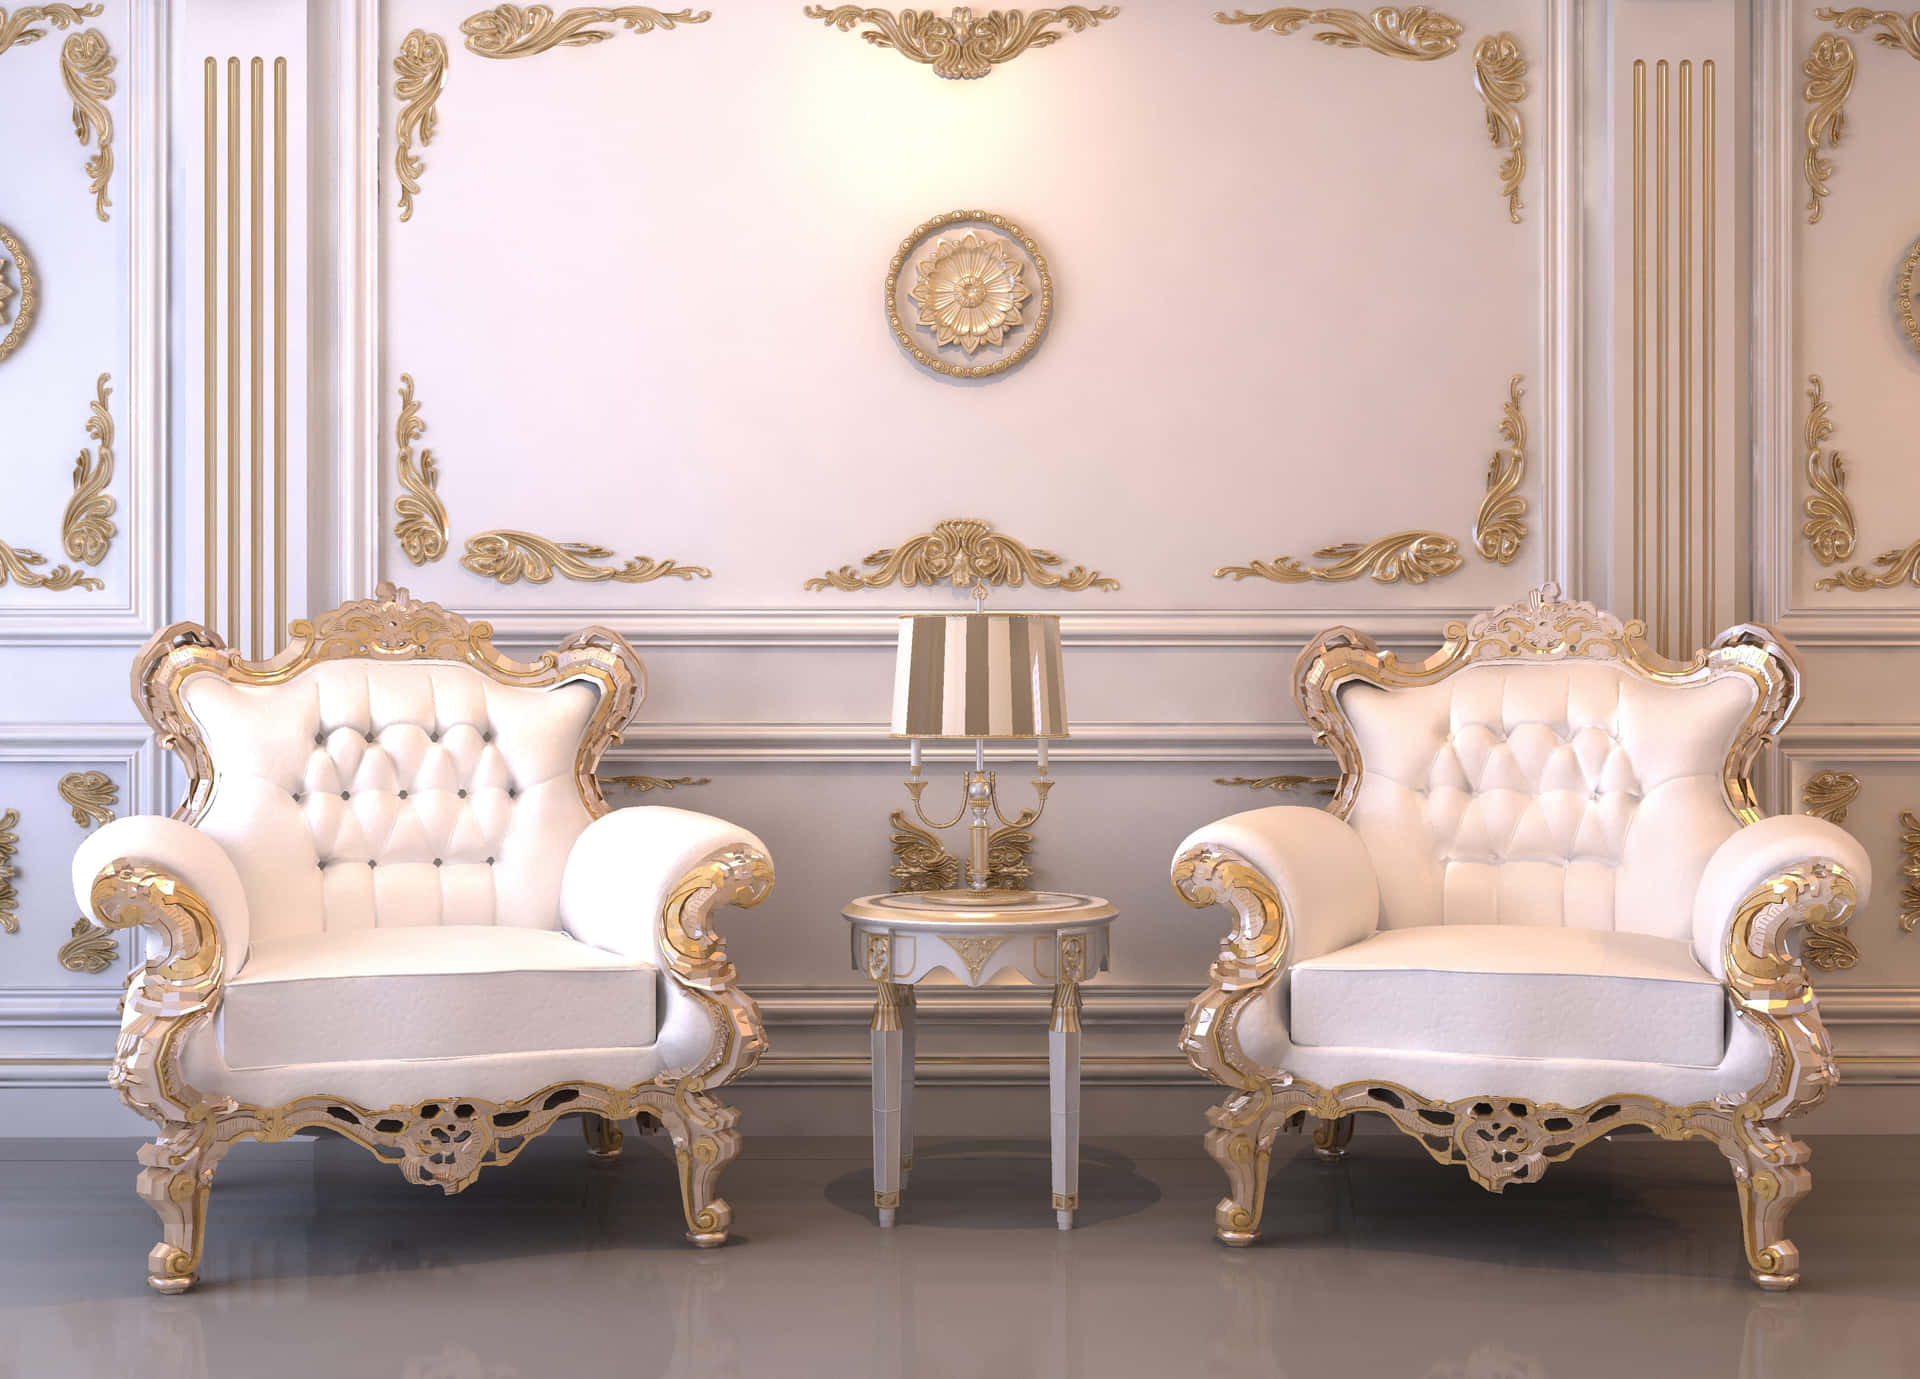 A White And Gold Living Room With Two Chairs